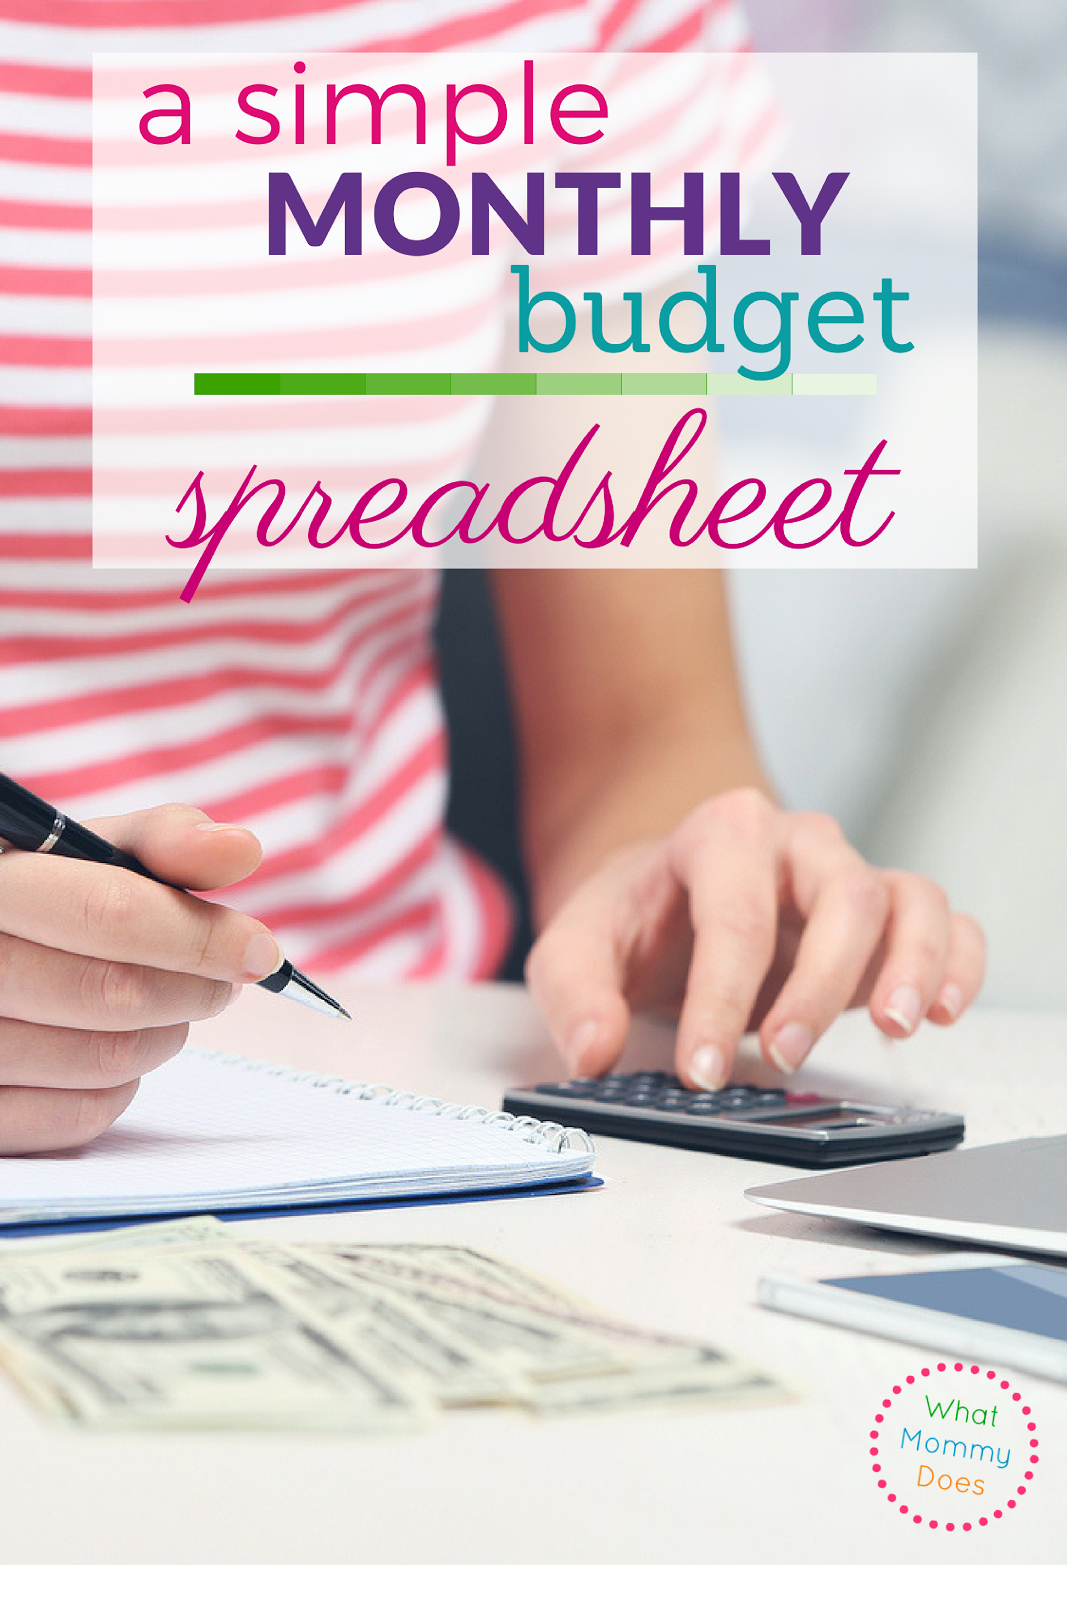 Free Simple Monthly Budget Template from www.whatmommydoes.com